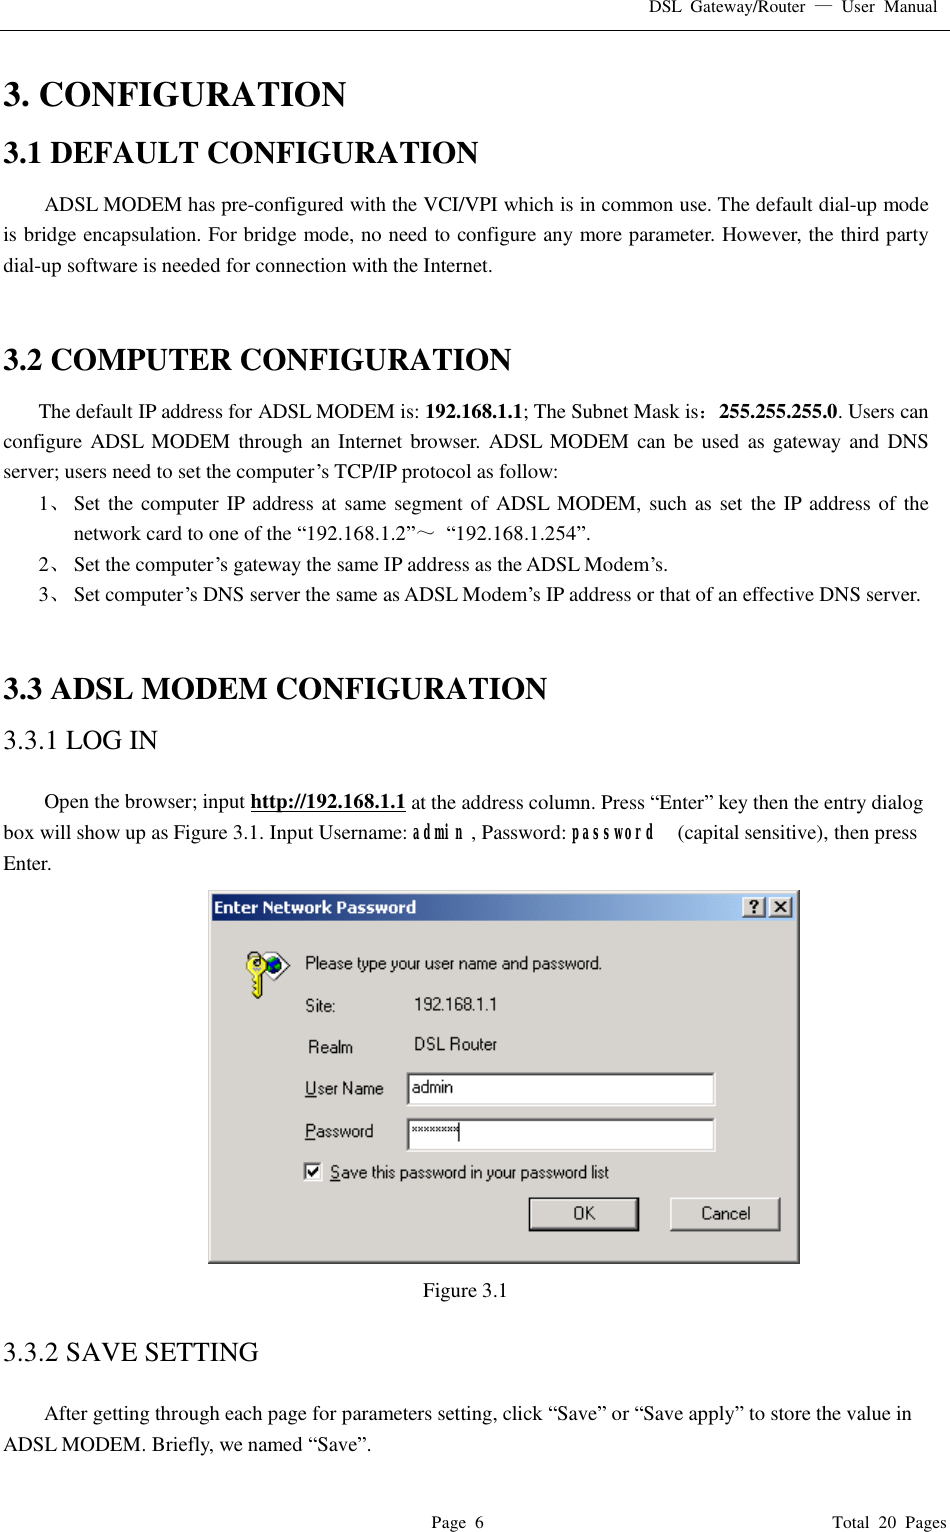 DSL Gateway/Router  — User Manual  Page 6                                       Total 20 Pages 3. CONFIGURATION 3.1 DEFAULT CONFIGURATION ADSL MODEM has pre-configured with the VCI/VPI which is in common use. The default dial-up mode is bridge encapsulation. For bridge mode, no need to configure any more parameter. However, the third party dial-up software is needed for connection with the Internet.   3.2 COMPUTER CONFIGURATION The default IP address for ADSL MODEM is: 192.168.1.1; The Subnet Mask is：255.255.255.0. Users can configure ADSL MODEM through an Internet browser. ADSL MODEM can be used as gateway and DNS server; users need to set the computer’s TCP/IP protocol as follow: 1、 Set the computer IP address at same segment of ADSL MODEM, such as set the IP address of the network card to one of the “192.168.1.2”～ “192.168.1.254”. 2、 Set the computer’s gateway the same IP address as the ADSL Modem’s. 3、 Set computer’s DNS server the same as ADSL Modem’s IP address or that of an effective DNS server.   3.3 ADSL MODEM CONFIGURATION 3.3.1 LOG IN  Open the browser; input http://192.168.1.1 at the address column. Press “Enter” key then the entry dialog box will show up as Figure 3.1. Input Username: admin , Password: password  (capital sensitive), then press Enter.                                     Figure 3.1  3.3.2 SAVE SETTING  After getting through each page for parameters setting, click “Save” or “Save apply” to store the value in ADSL MODEM. Briefly, we named “Save”. 